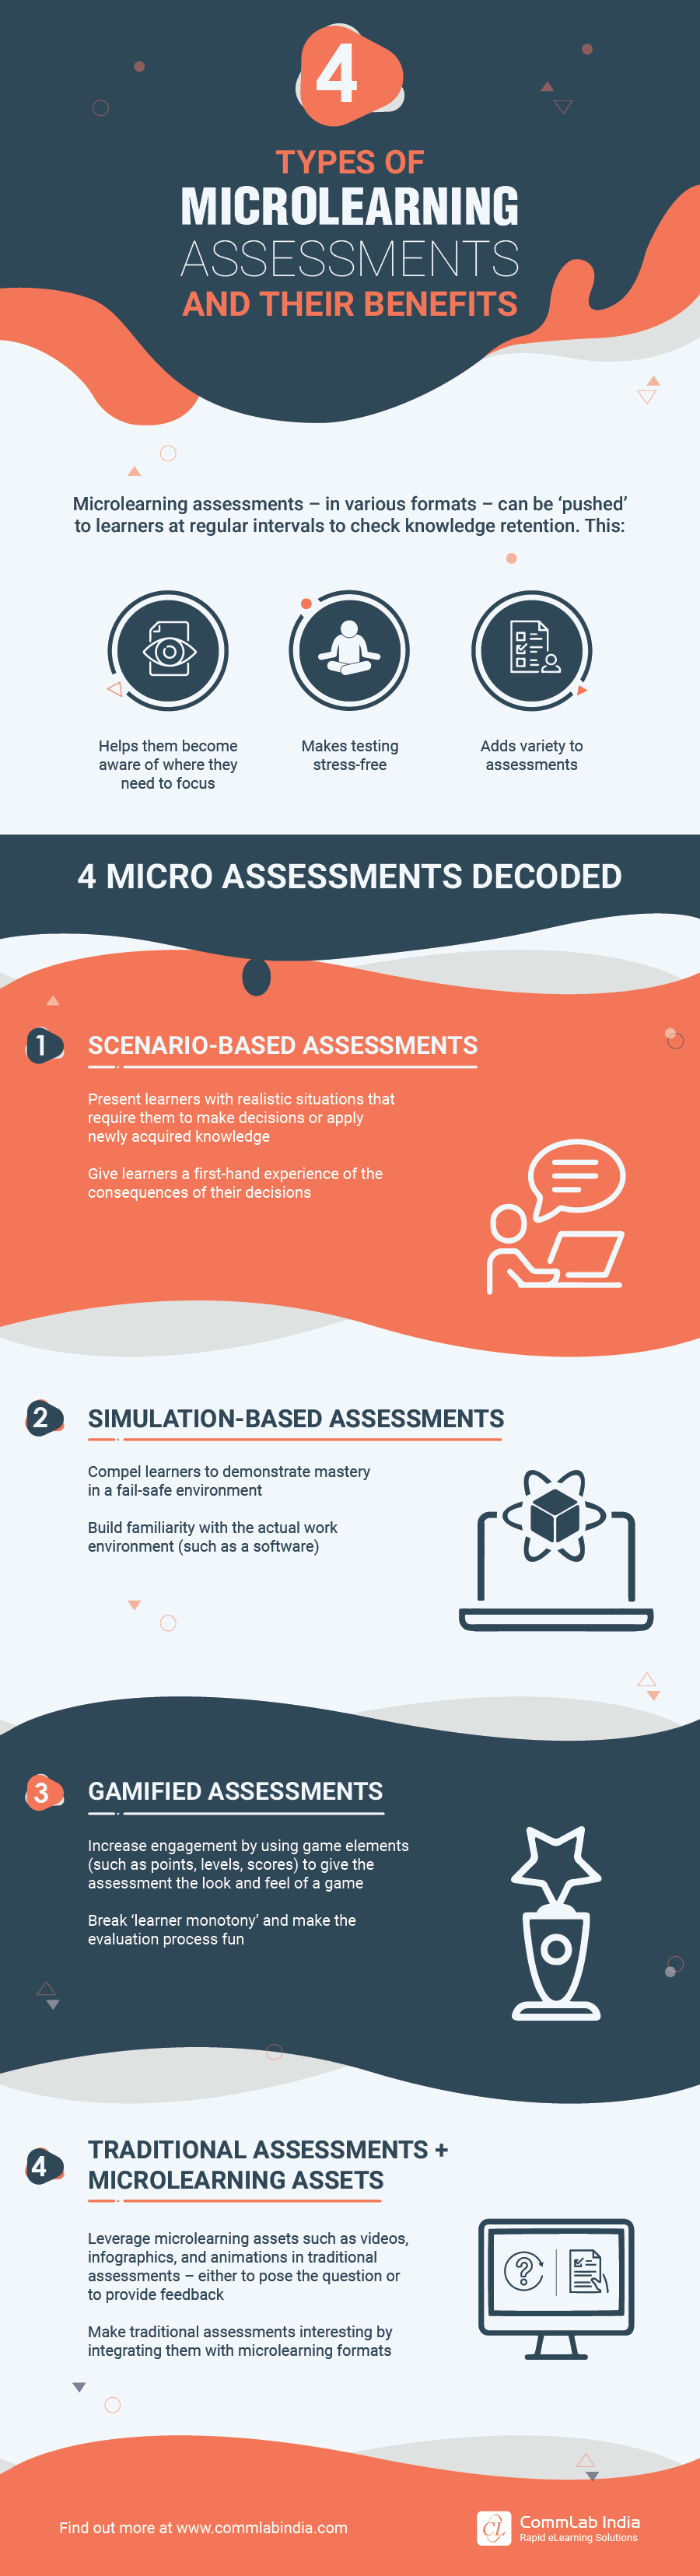 4 Types of Microlearning Assessments and their Benefits [Infographic]